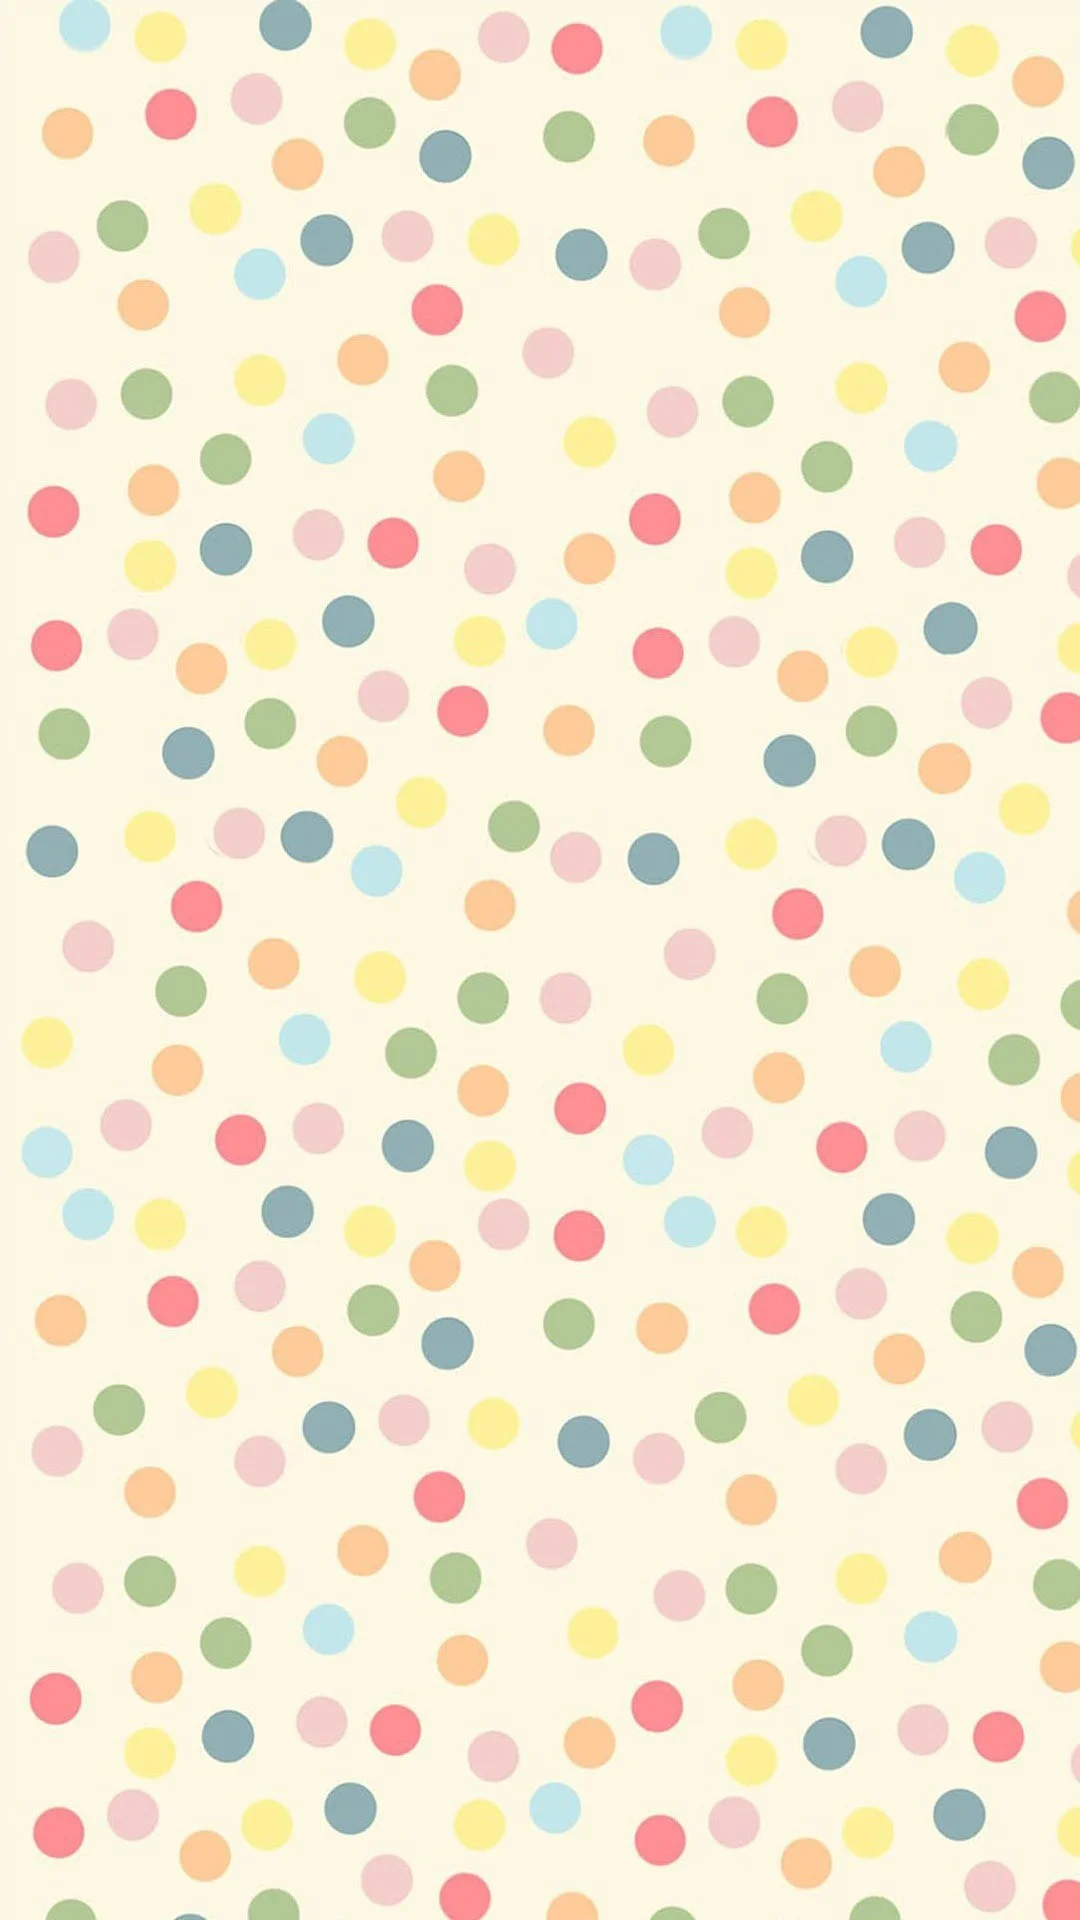 Polka dot wallpaper for iPhone or Android